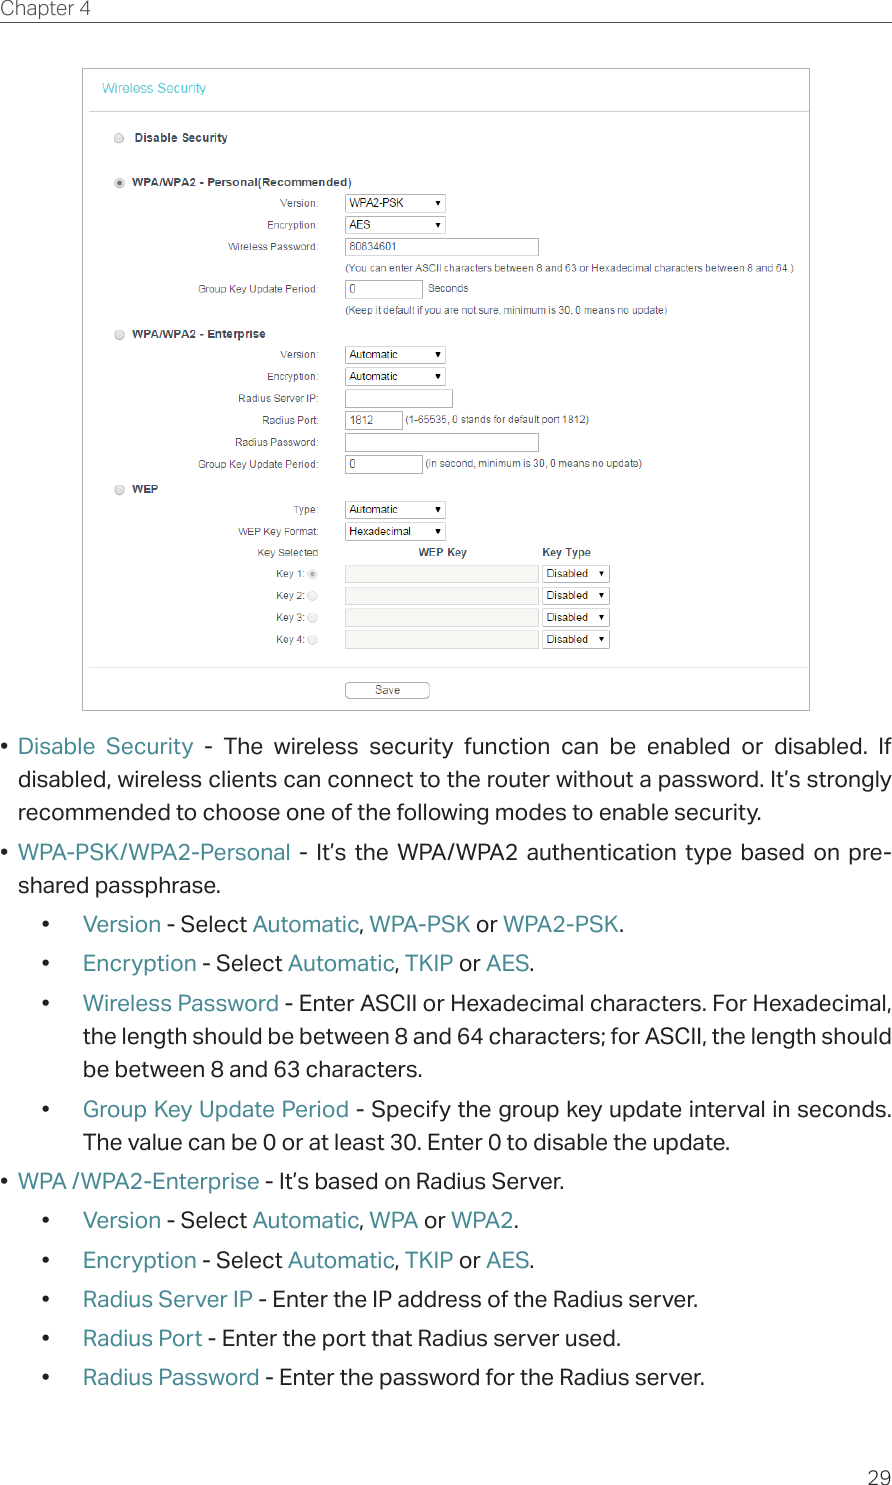 29Chapter 4  •  Disable Security - The wireless security function can be enabled or disabled. If disabled, wireless clients can connect to the router without a password. It’s strongly recommended to choose one of the following modes to enable security.•  WPA-PSK/WPA2-Personal - It’s the WPA/WPA2 authentication type based on pre-shared passphrase. •  Version - Select Automatic, WPA-PSK or WPA2-PSK.•  Encryption - Select Automatic, TKIP or AES.•  Wireless Password - Enter ASCII or Hexadecimal characters. For Hexadecimal, the length should be between 8 and 64 characters; for ASCII, the length should be between 8 and 63 characters.•  Group Key Update Period - Specify the group key update interval in seconds. The value can be 0 or at least 30. Enter 0 to disable the update.•  WPA /WPA2-Enterprise - It’s based on Radius Server.•  Version - Select Automatic, WPA or WPA2.•  Encryption - Select Automatic, TKIP or AES.•  Radius Server IP - Enter the IP address of the Radius server.•  Radius Port - Enter the port that Radius server used.•  Radius Password - Enter the password for the Radius server.